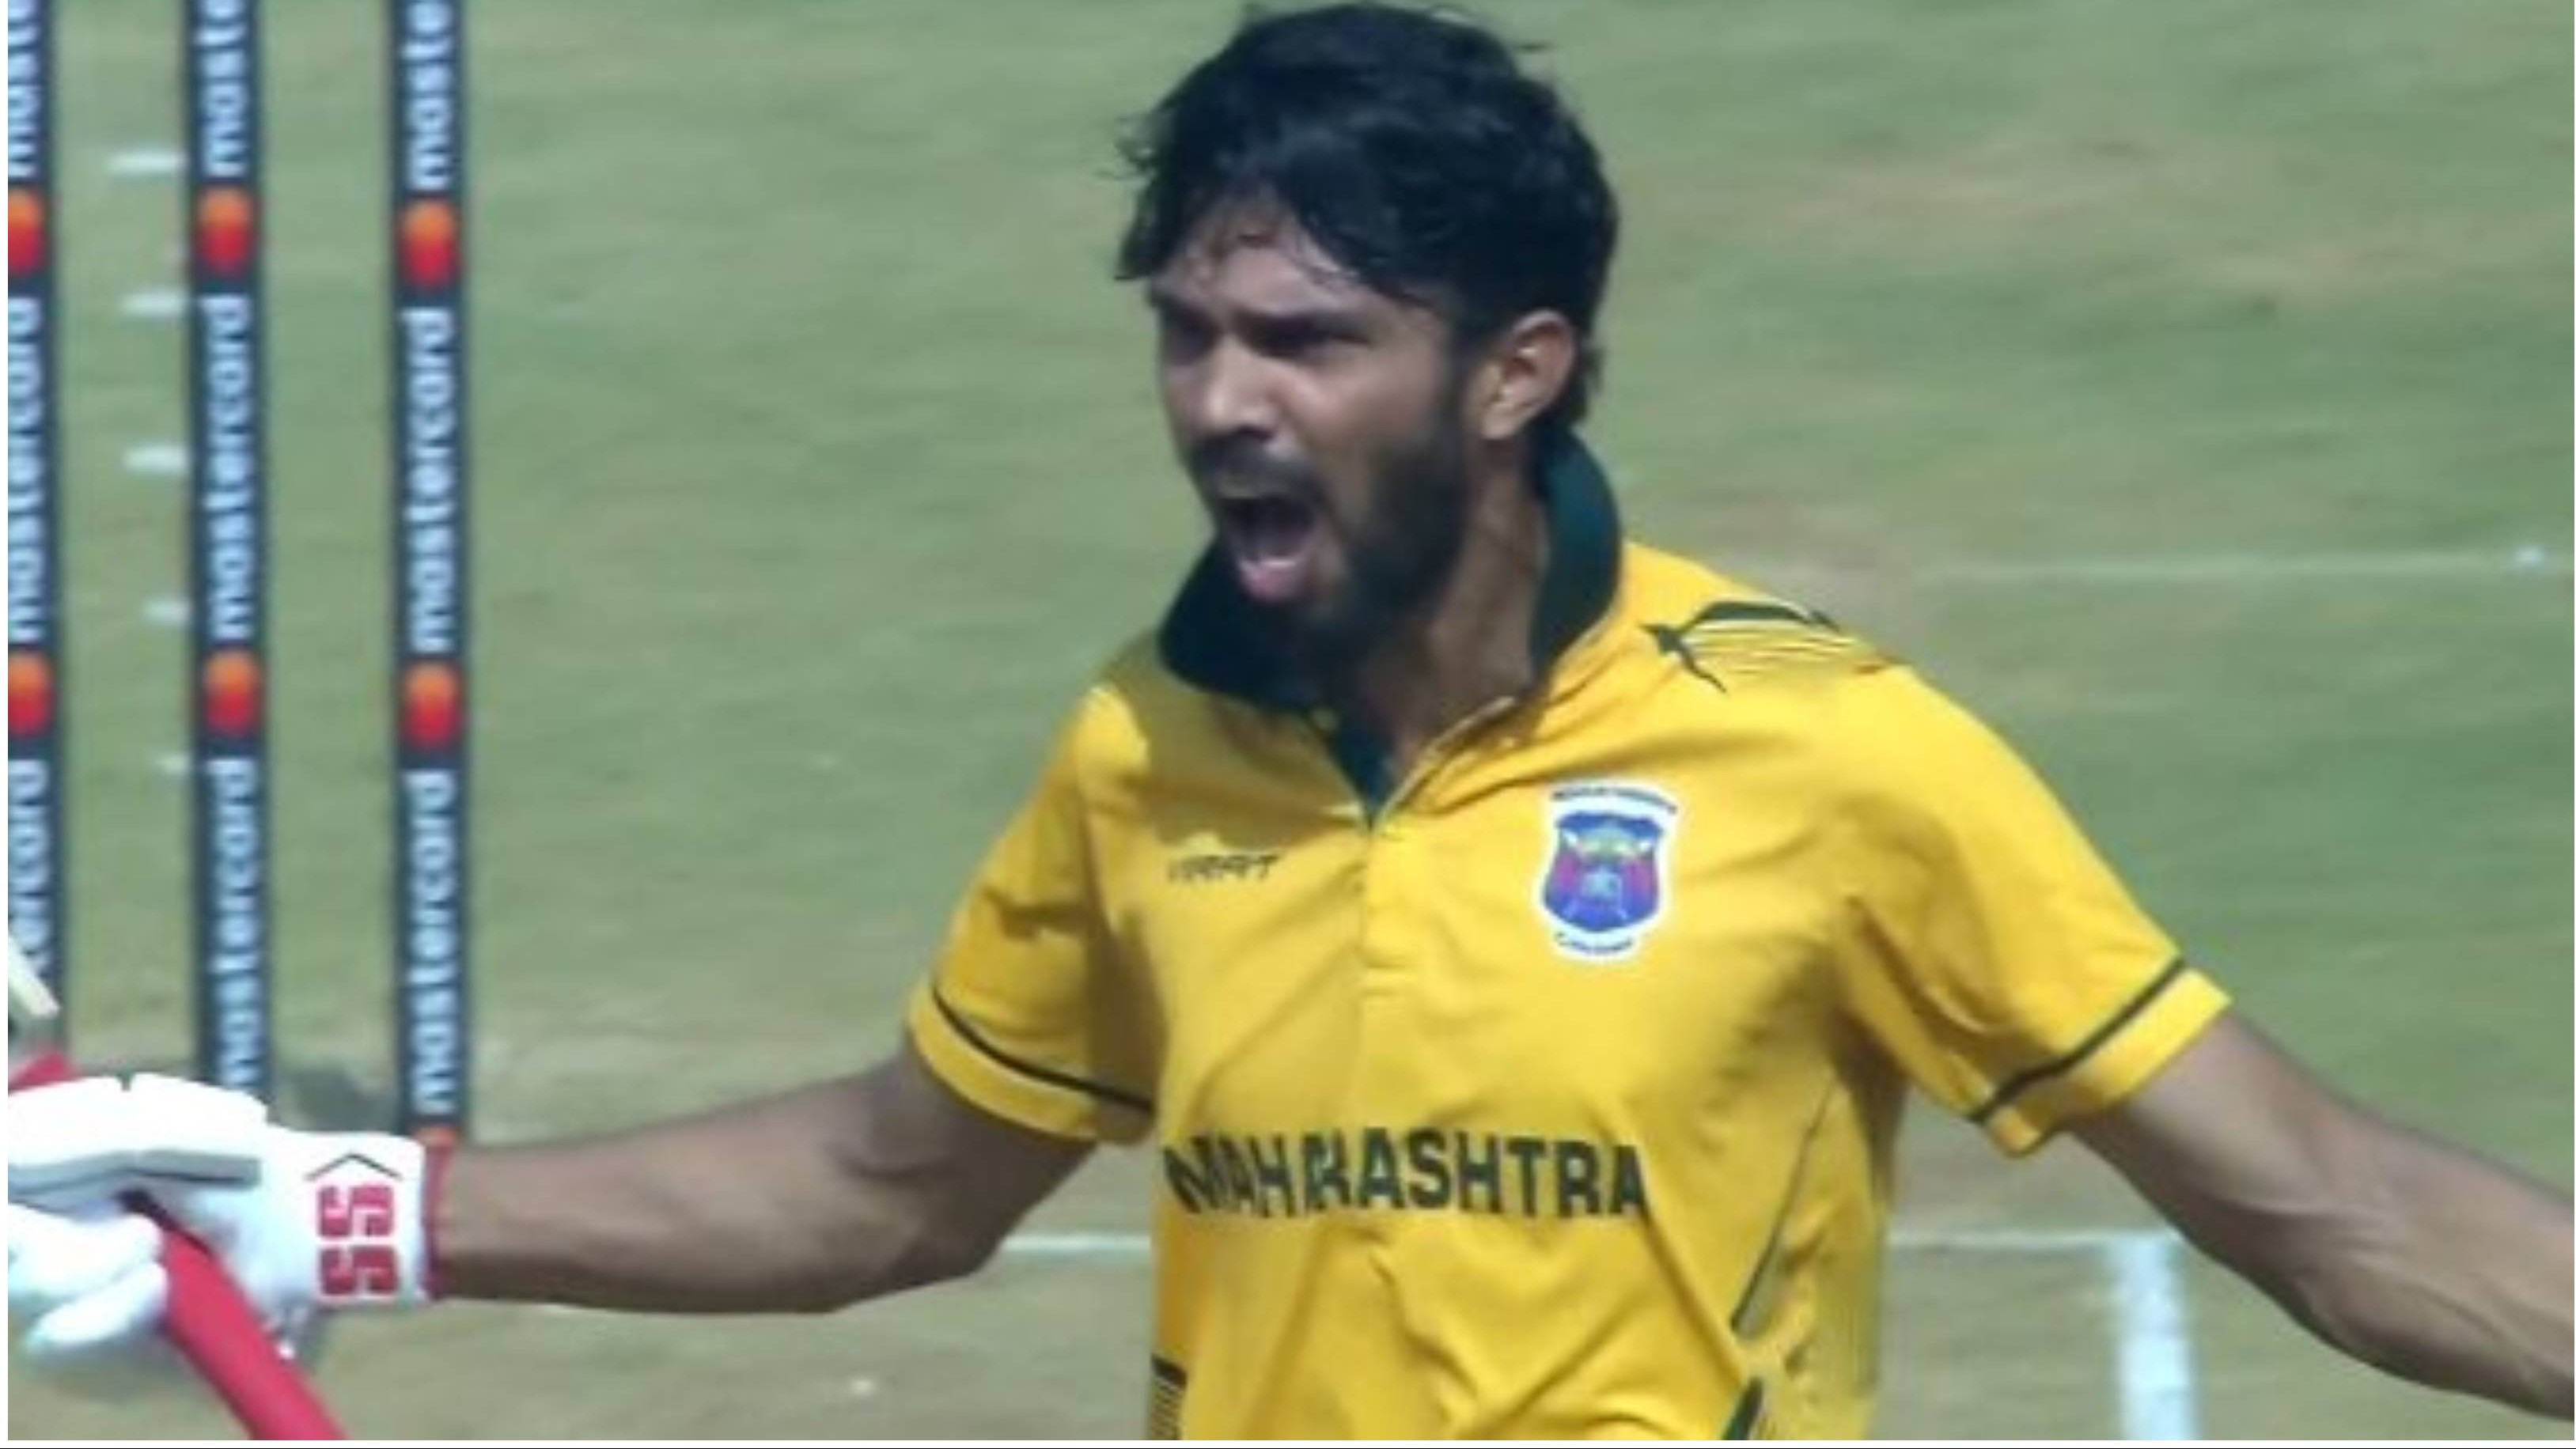 “Trying to become as consistent as possible,” Ruturaj Gaikwad after record-breaking spree in Vijay Hazare Trophy 2022